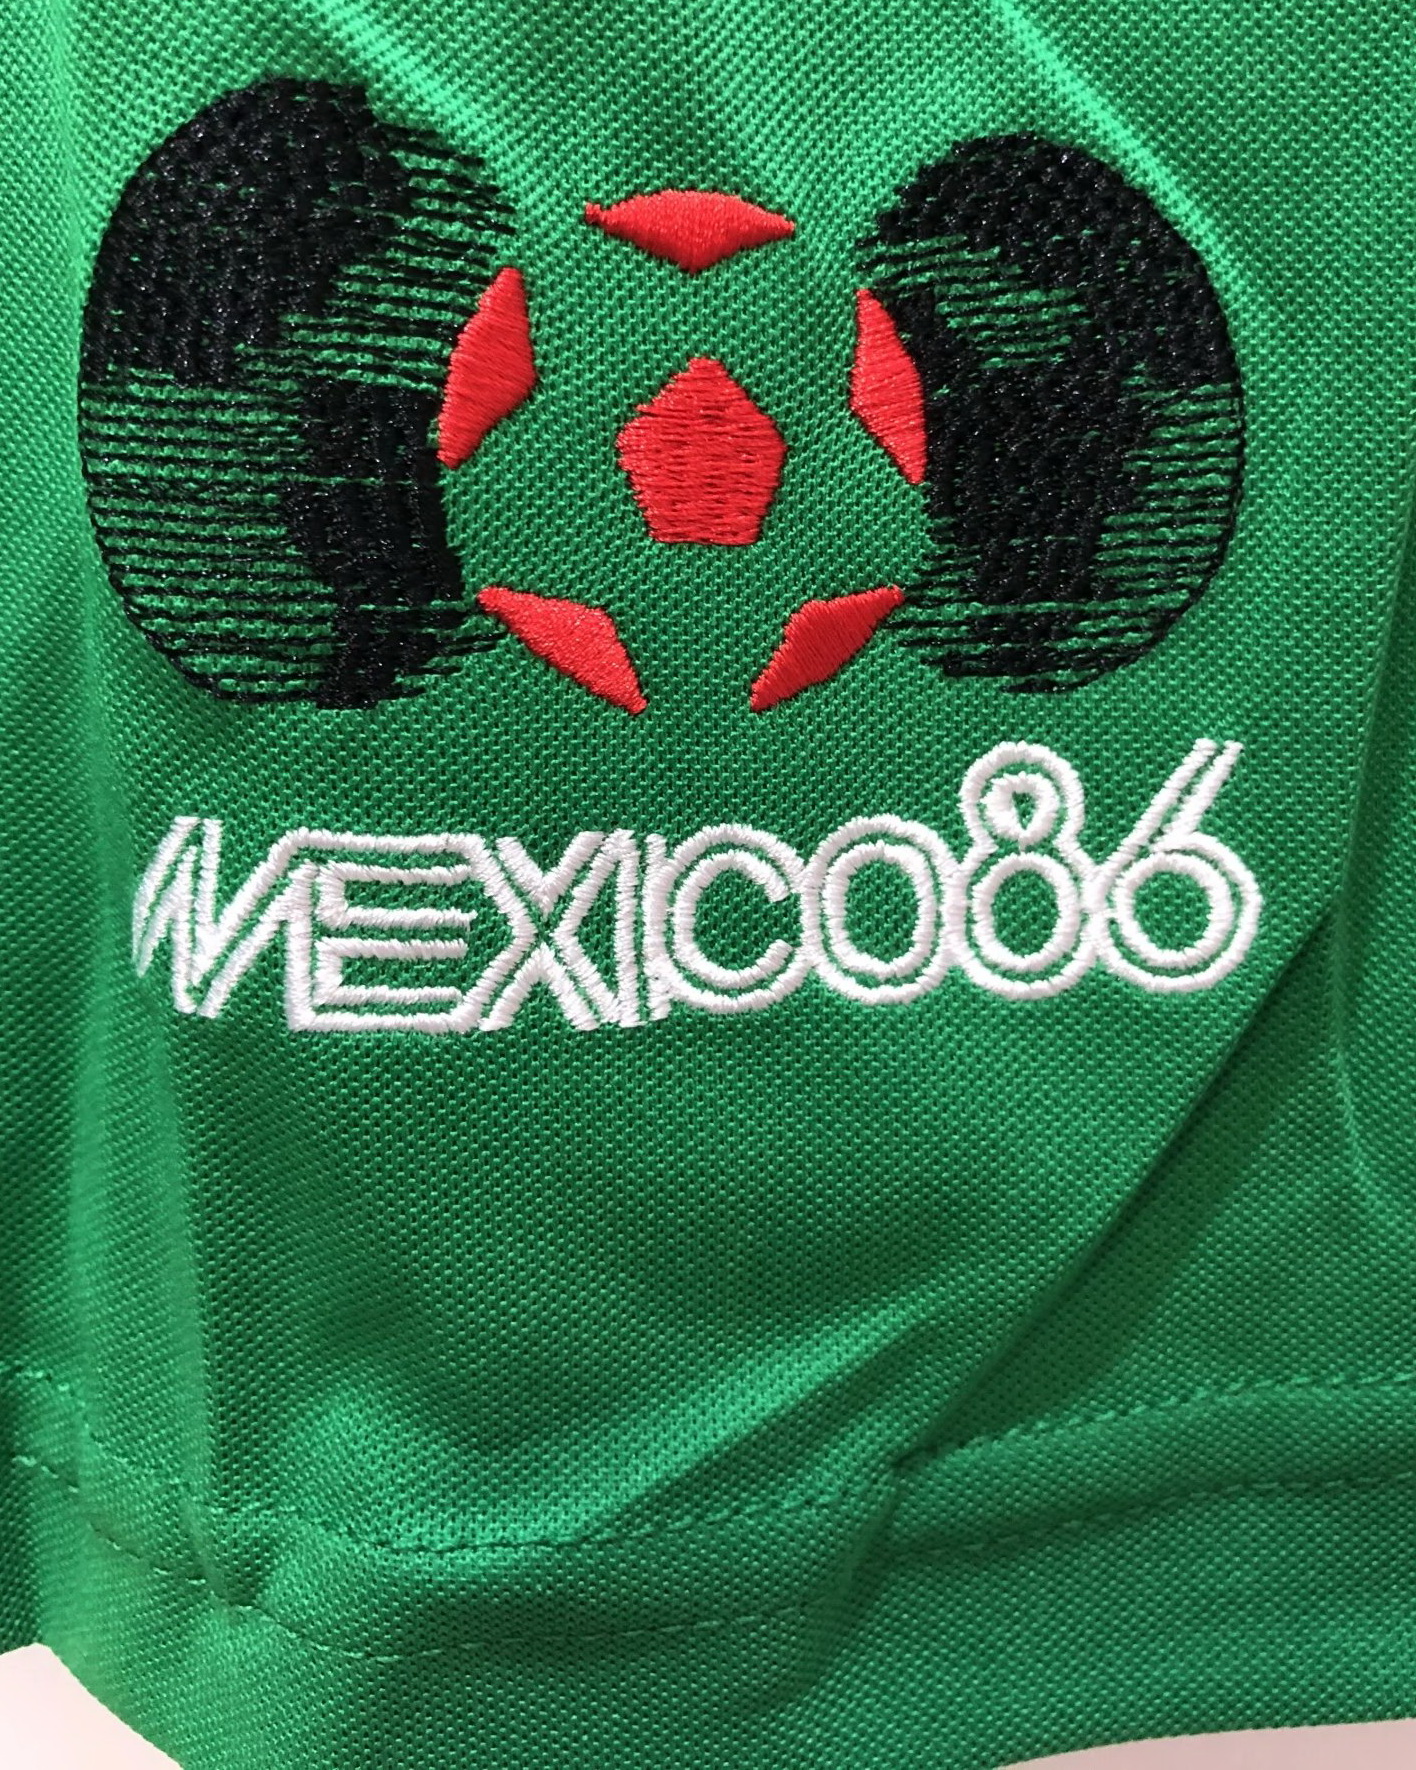 Mexico 1986 Home Green Soccer Jersey